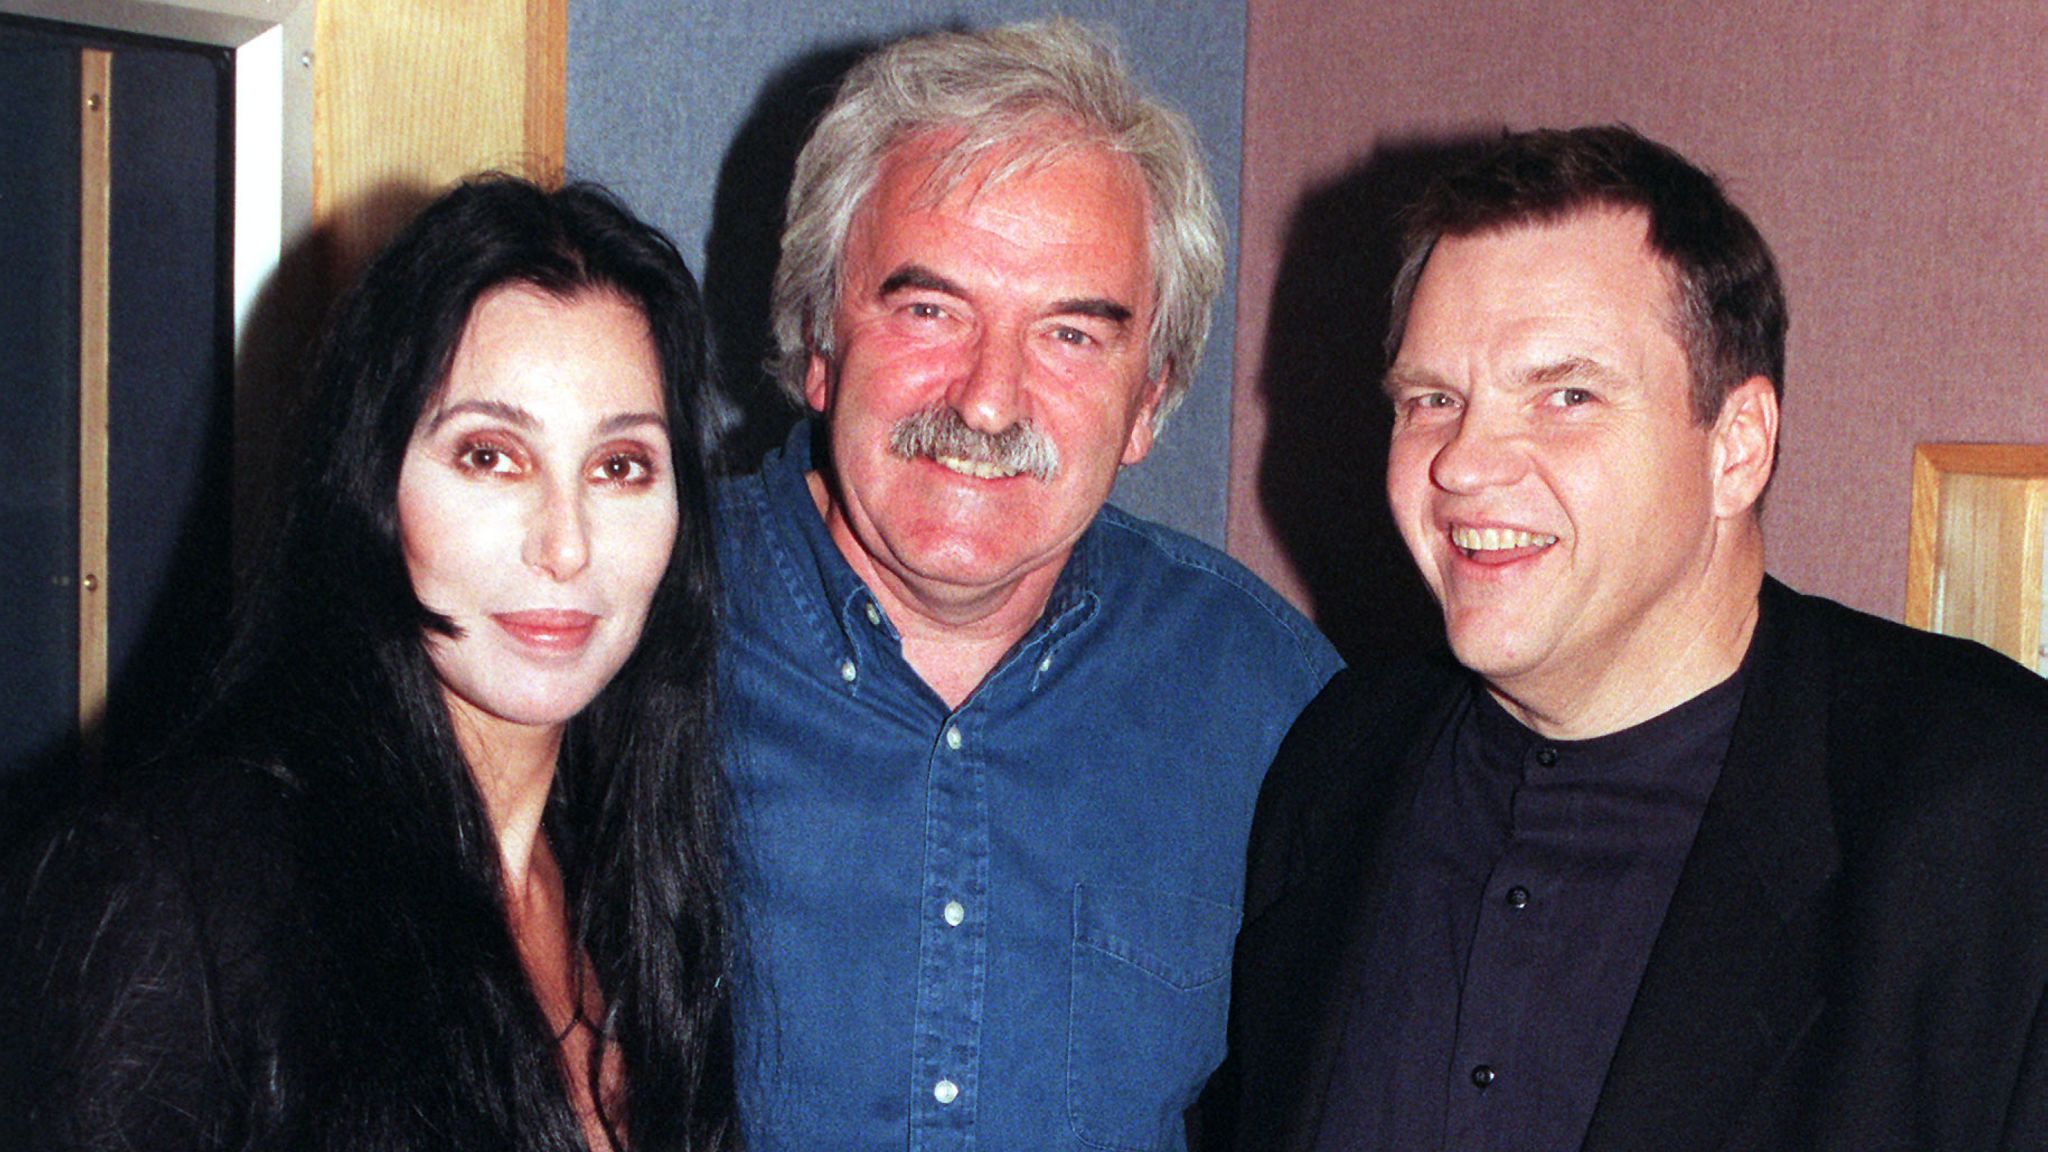 File photo dated 16/10/98 of American singers Cher (left) and Meat Loaf posing for the media with Des Lynam (centre) after they joined him on The Des Lynam Show on BBC Radio 2. US singer Meat Loaf, whose hits included Bat Out of Hell, has died aged 74, a statement on his official Facebook page said. Issue date: Friday January 21, 2022.